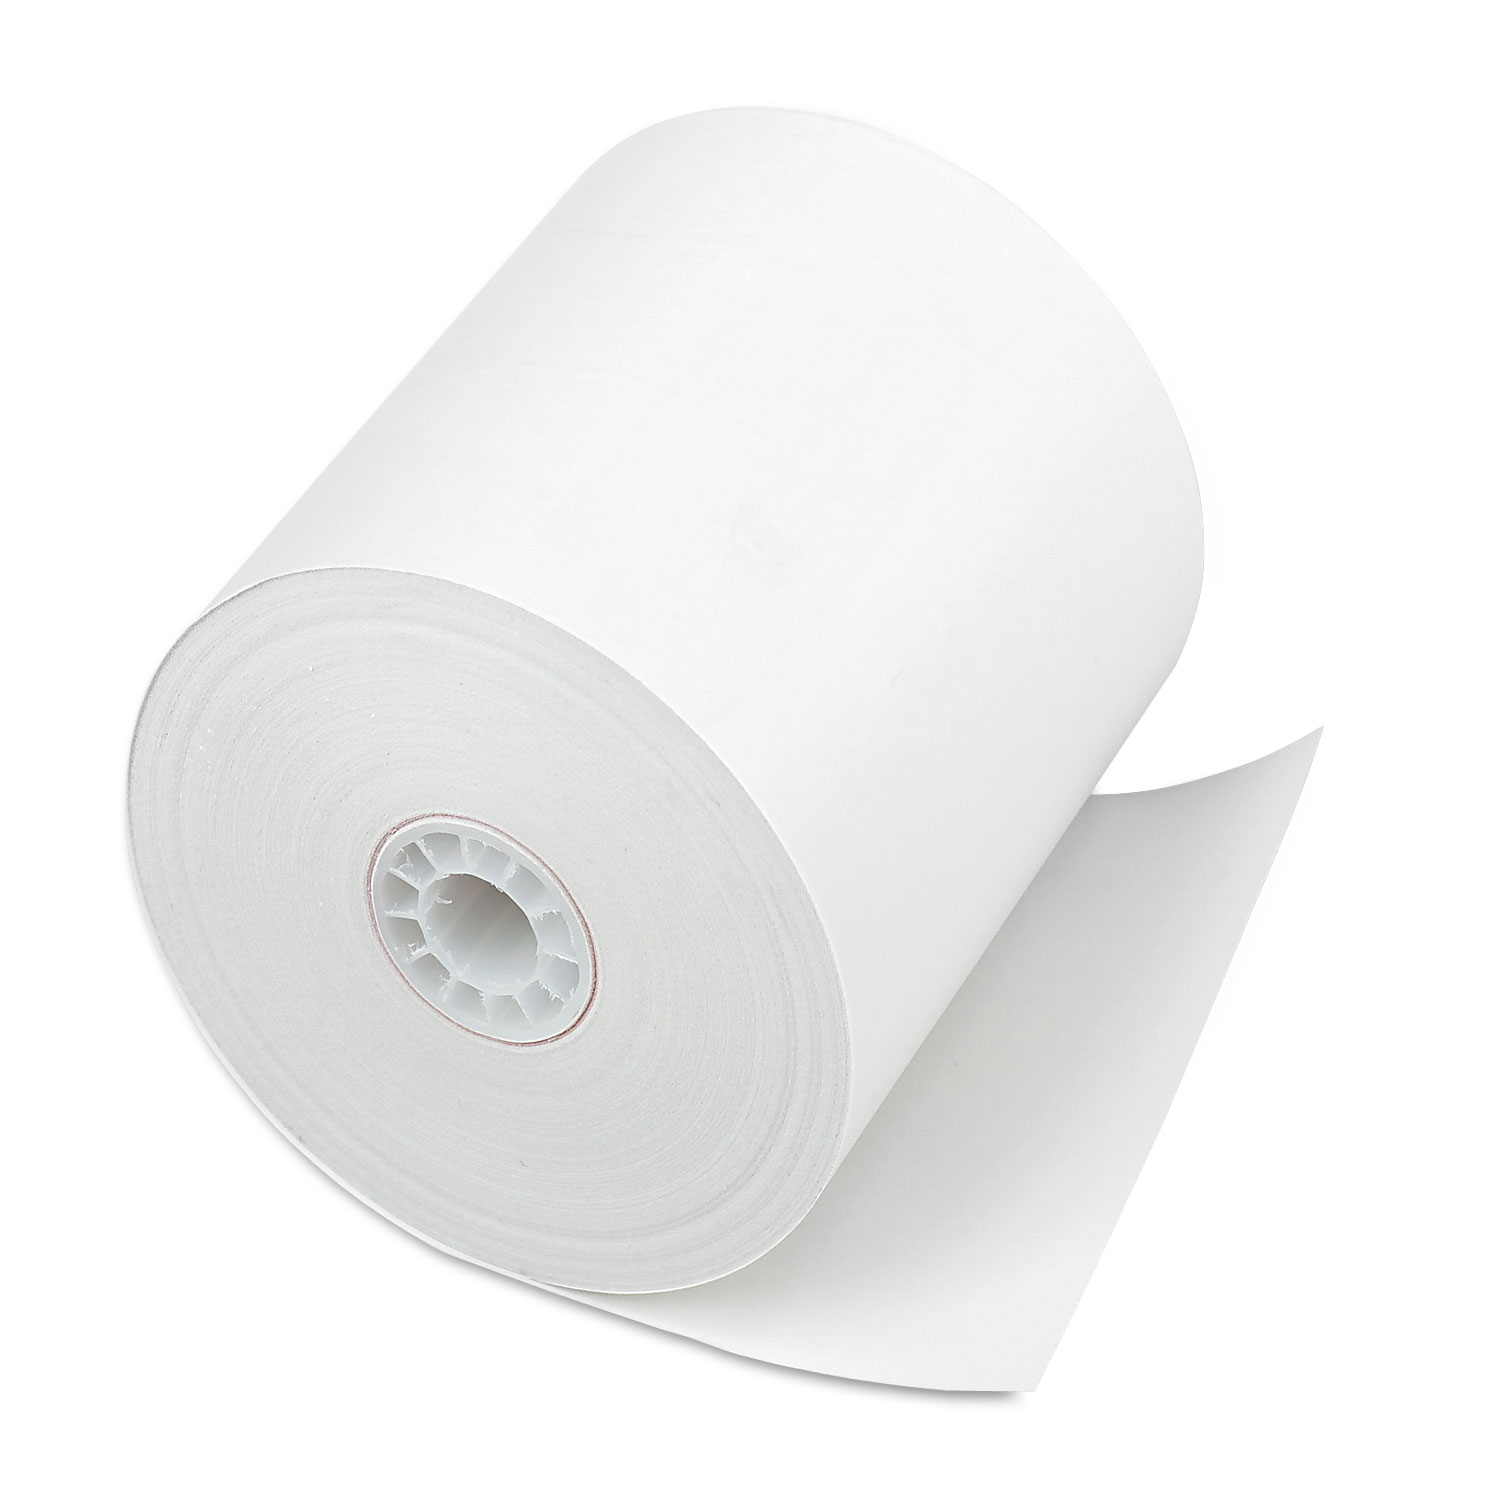  Iconex 8838 Direct Thermal Printing Thermal Paper Rolls, 3 x 225 ft, White, 24/Carton (ICX90781294) 